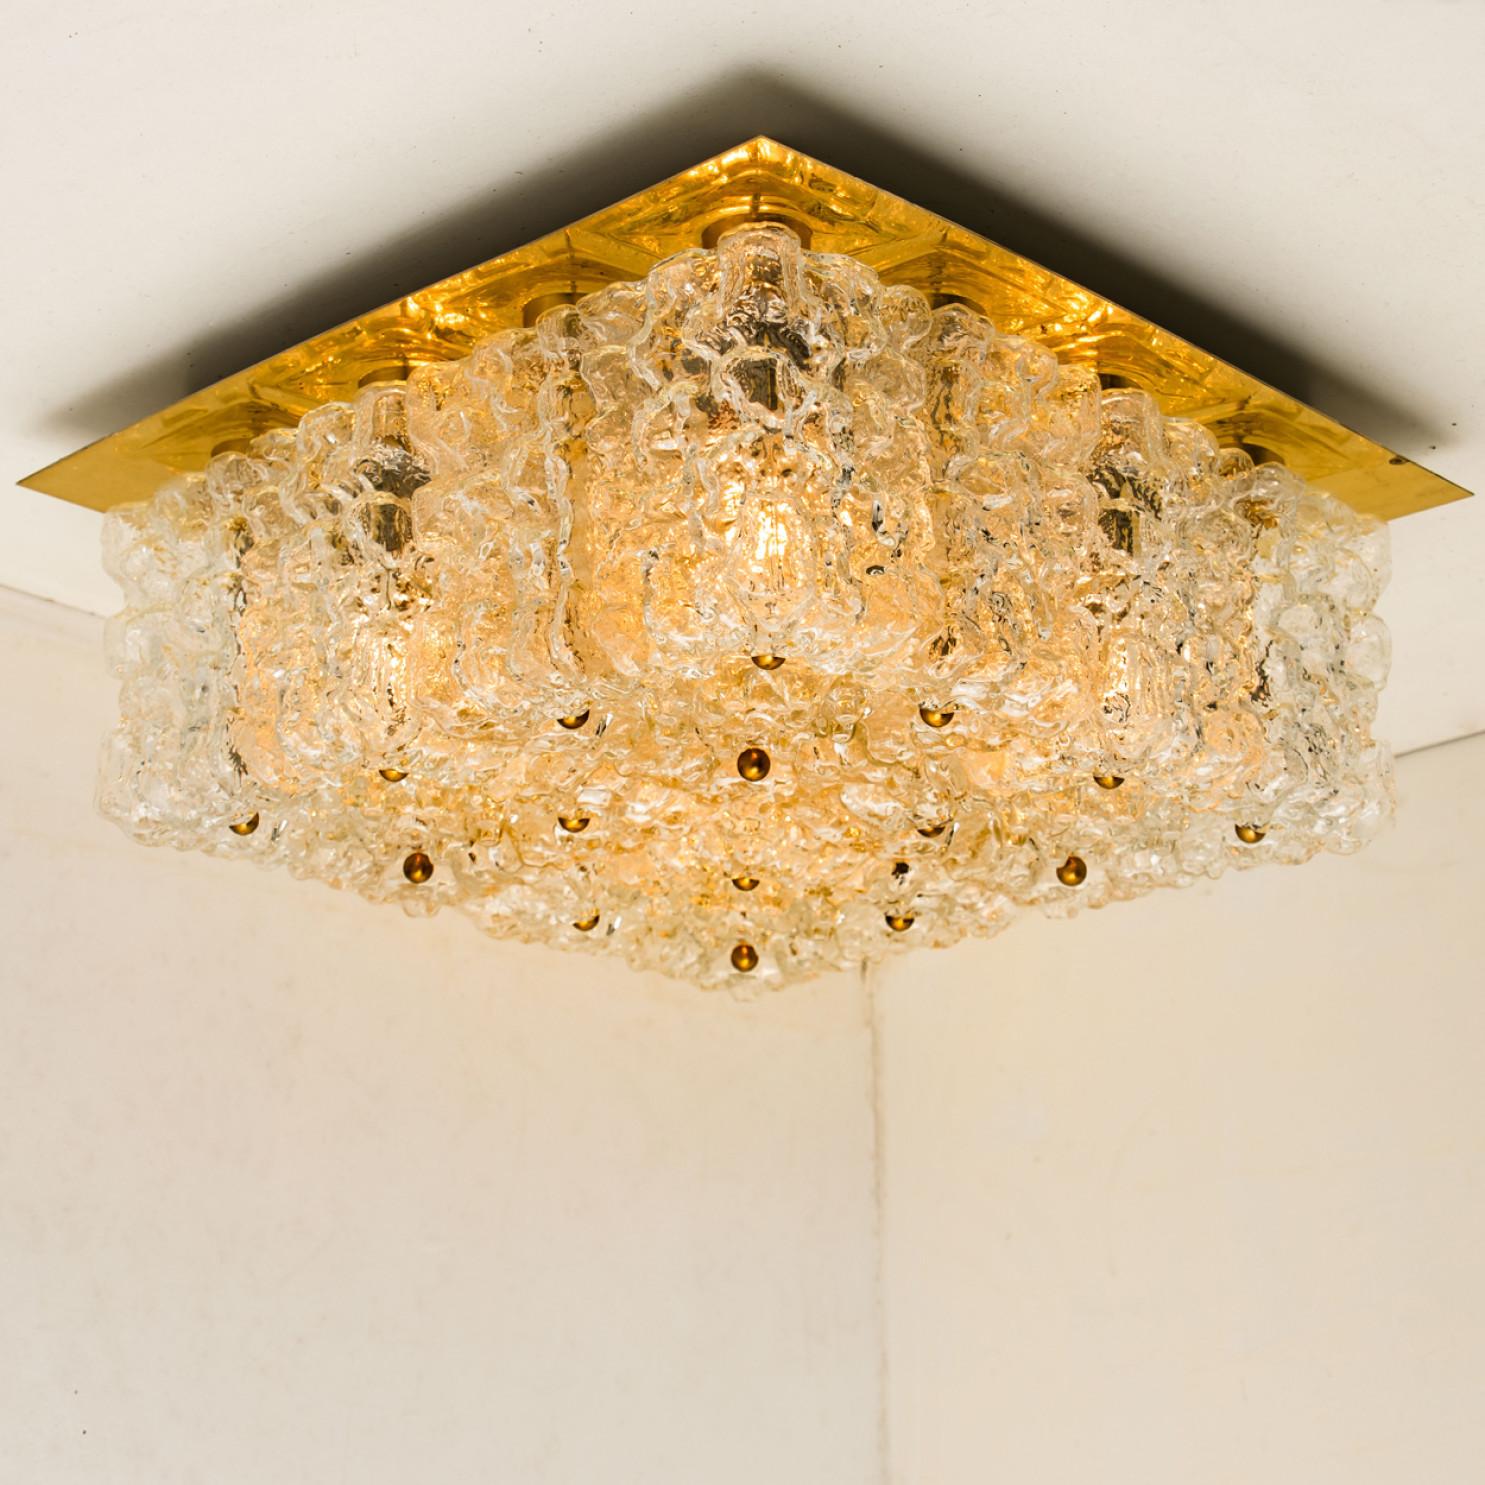 Mid-Century Modern textured ice glass light fixture by German manufacturer Kaiser, circa 1965.

This ceiling light, often mistakenly attributed to Kalmar, features 16 glass blocks mounted on a golden brass backplate.

Well- wired, cleaned in full